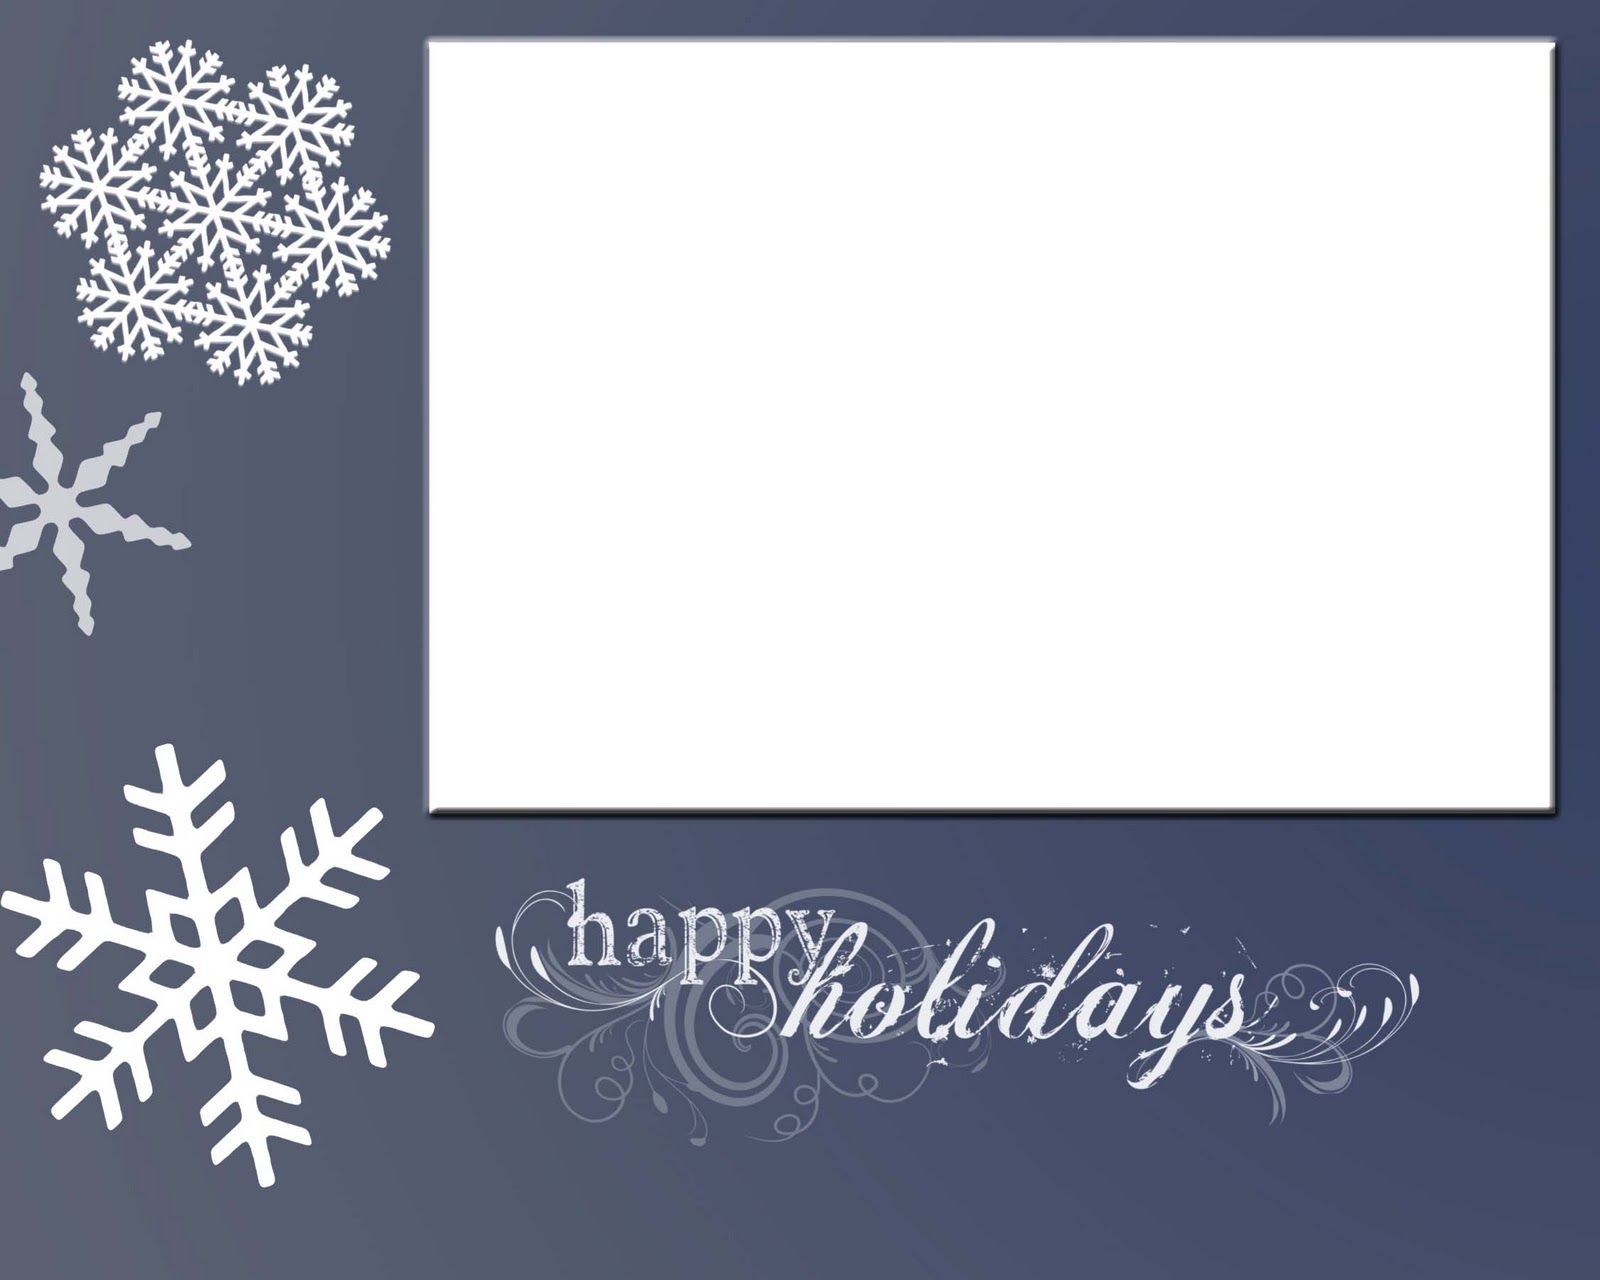 Lovely Little Snippets Christmas Card Display And 5 Free Printable 